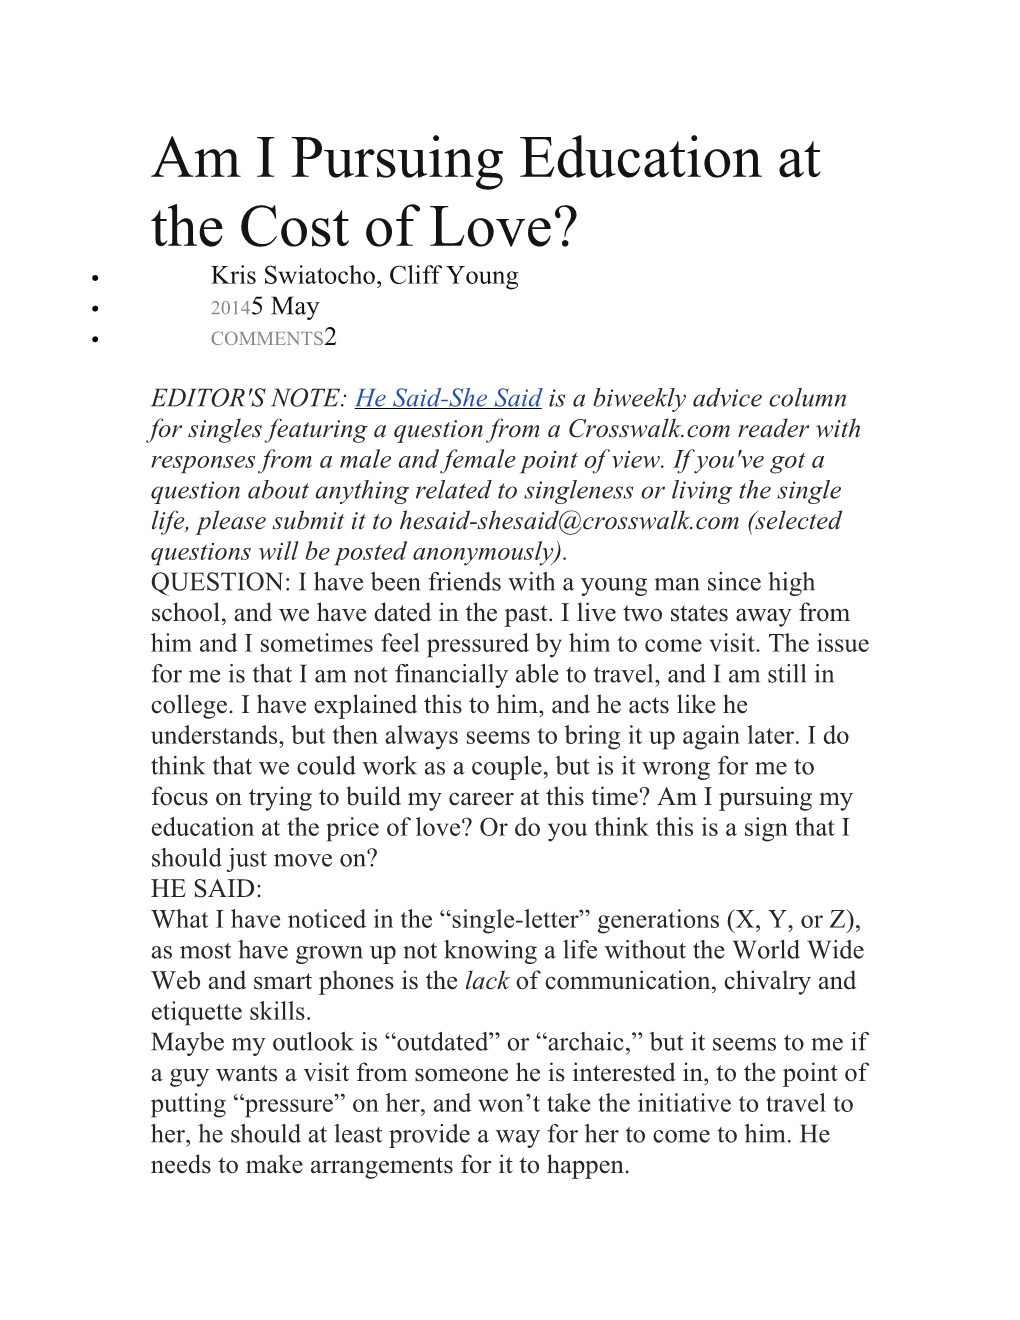 Am I Pursuing Education at the Cost of Love?